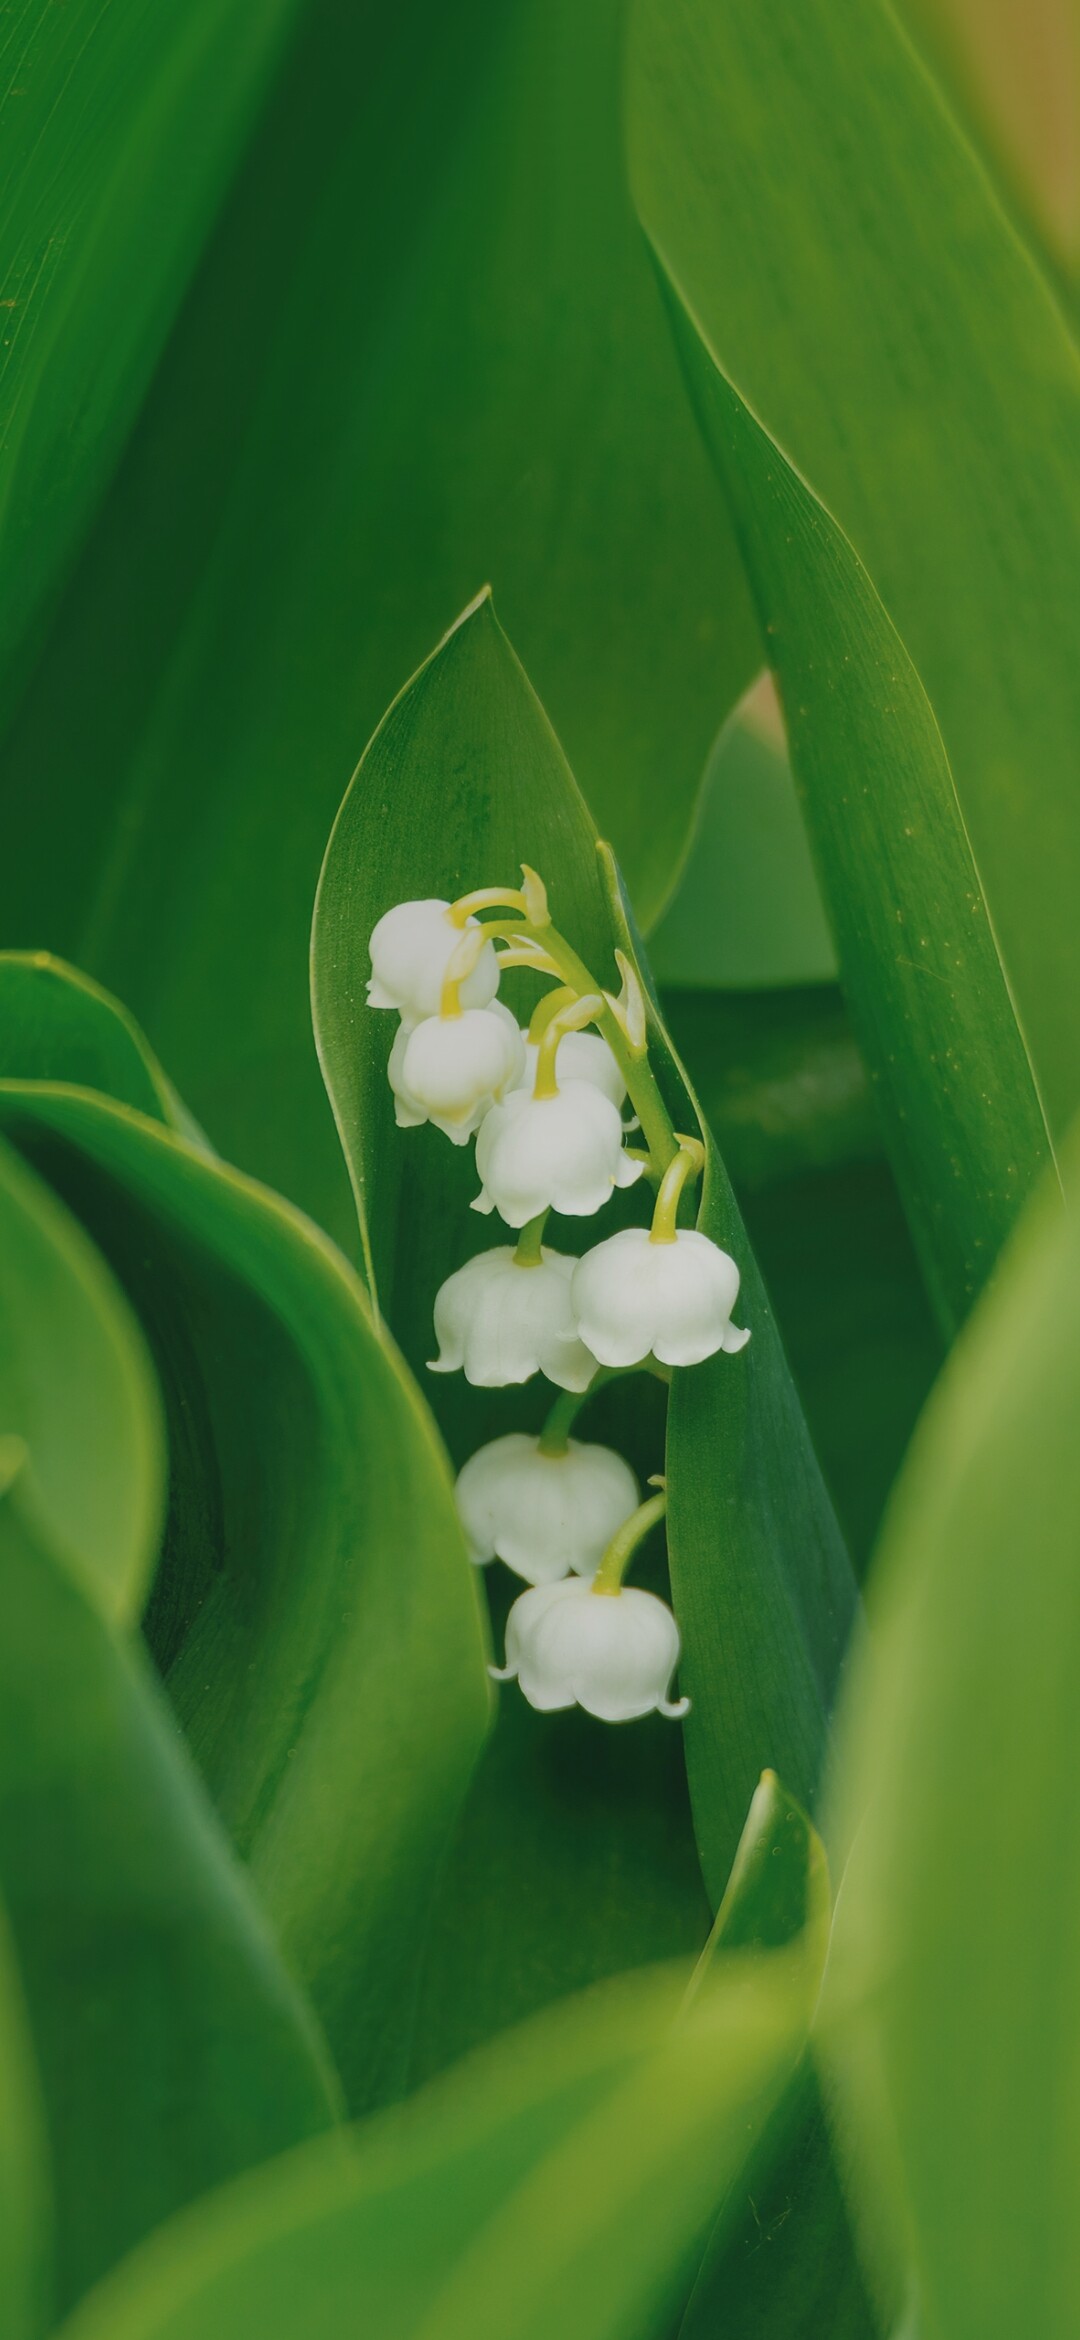 Lily of the Valley: With strong biblical connections, it's said to have first bloomed where Eve's tears fell as she left the Garden of Eden. 1080x2340 HD Wallpaper.